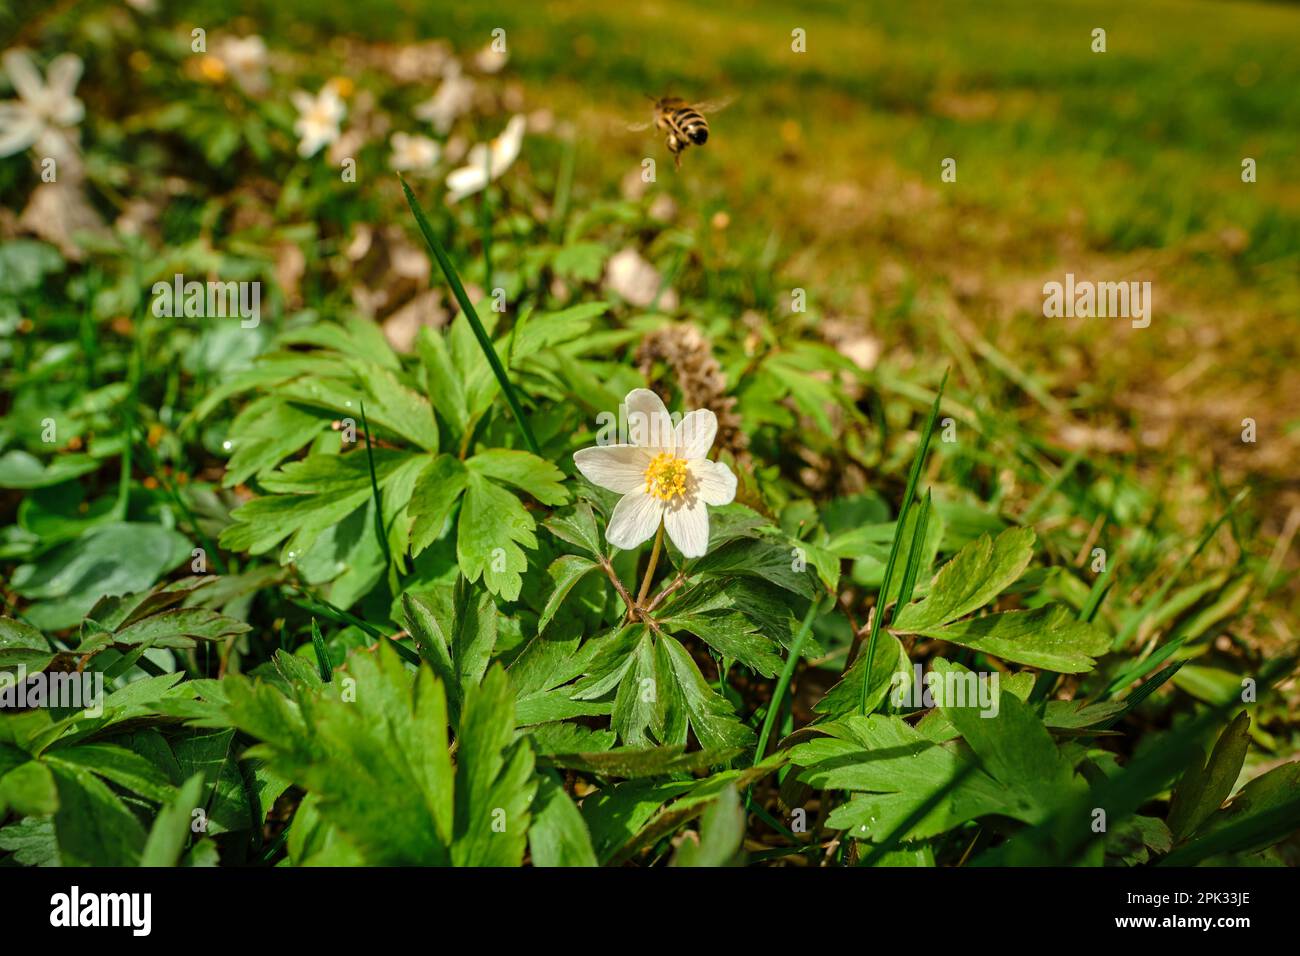 Wild bee pollinating a white-yellow wood anemone early-spring windflower in a green garden, park or forest on a sunny day Stock Photo